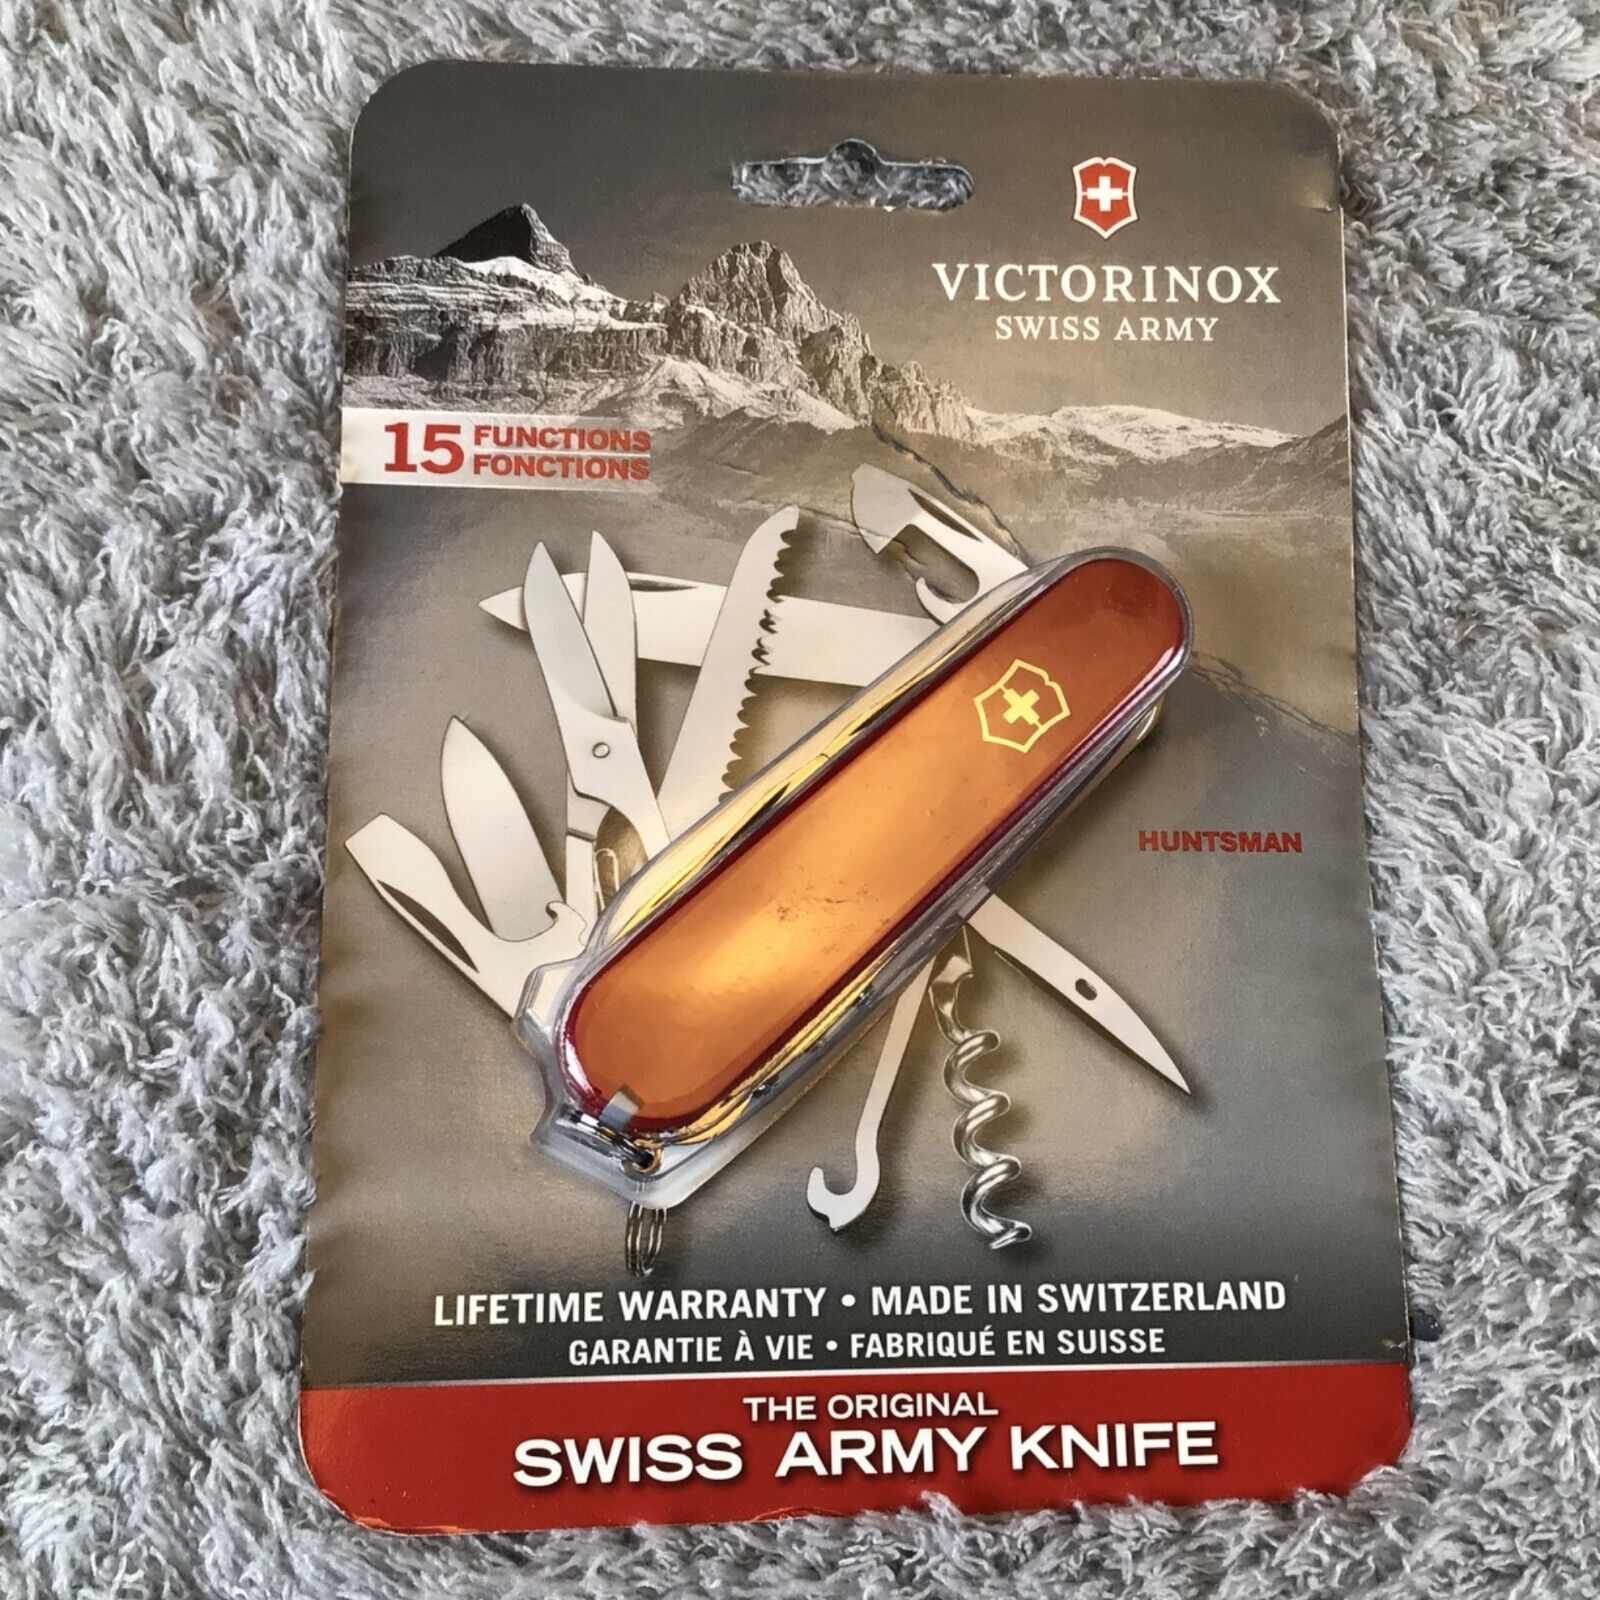 Victorinox Swiss Army Knife Huntsman Red 15 Functions Lifetime Warranty Made In